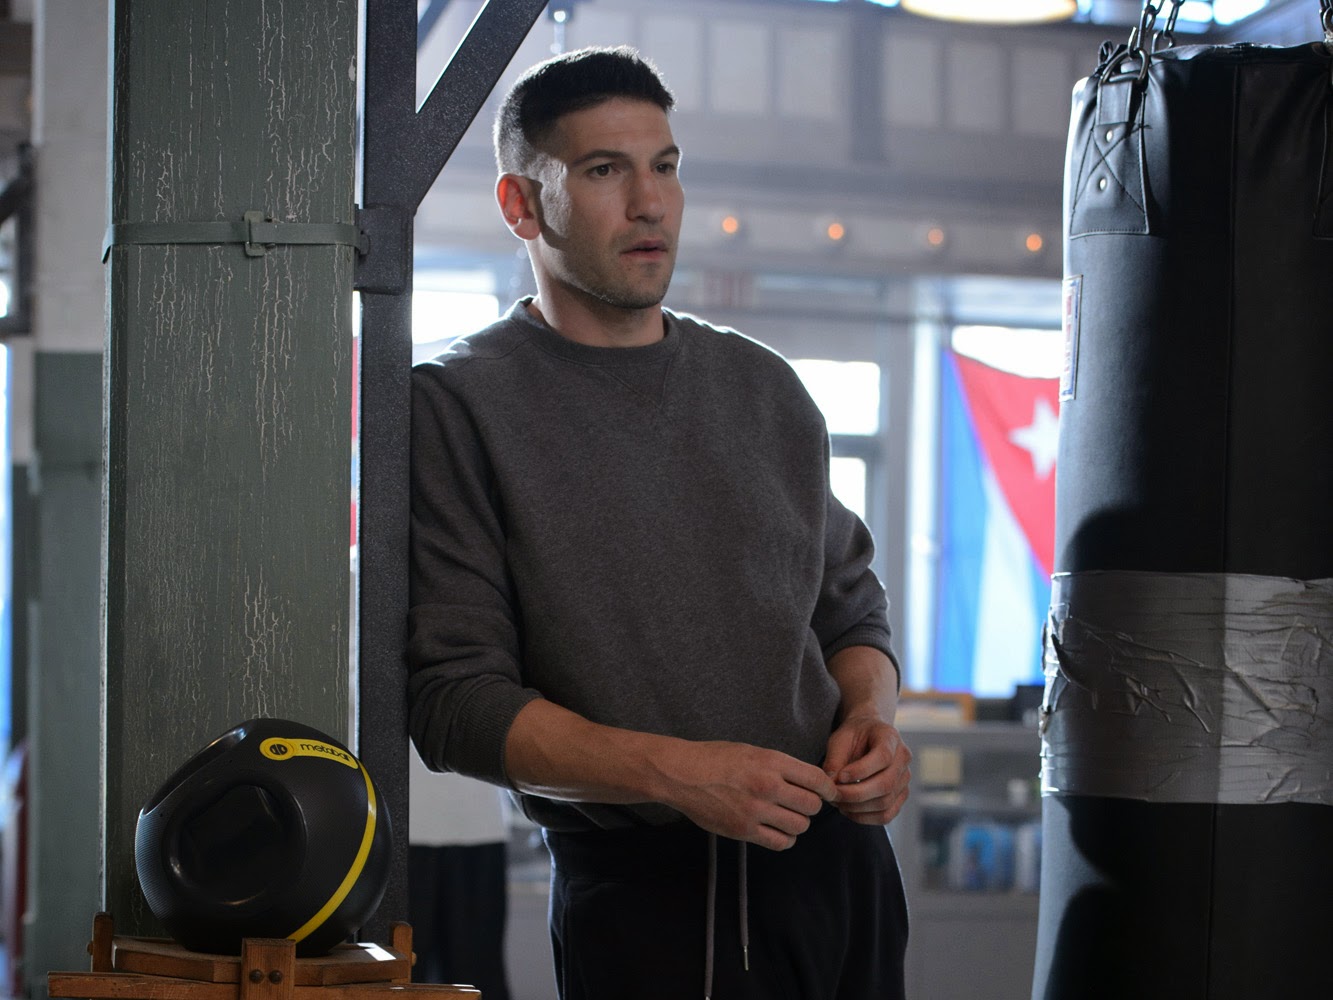 15 Minute Jon Bernthal Workout for Push Pull Legs